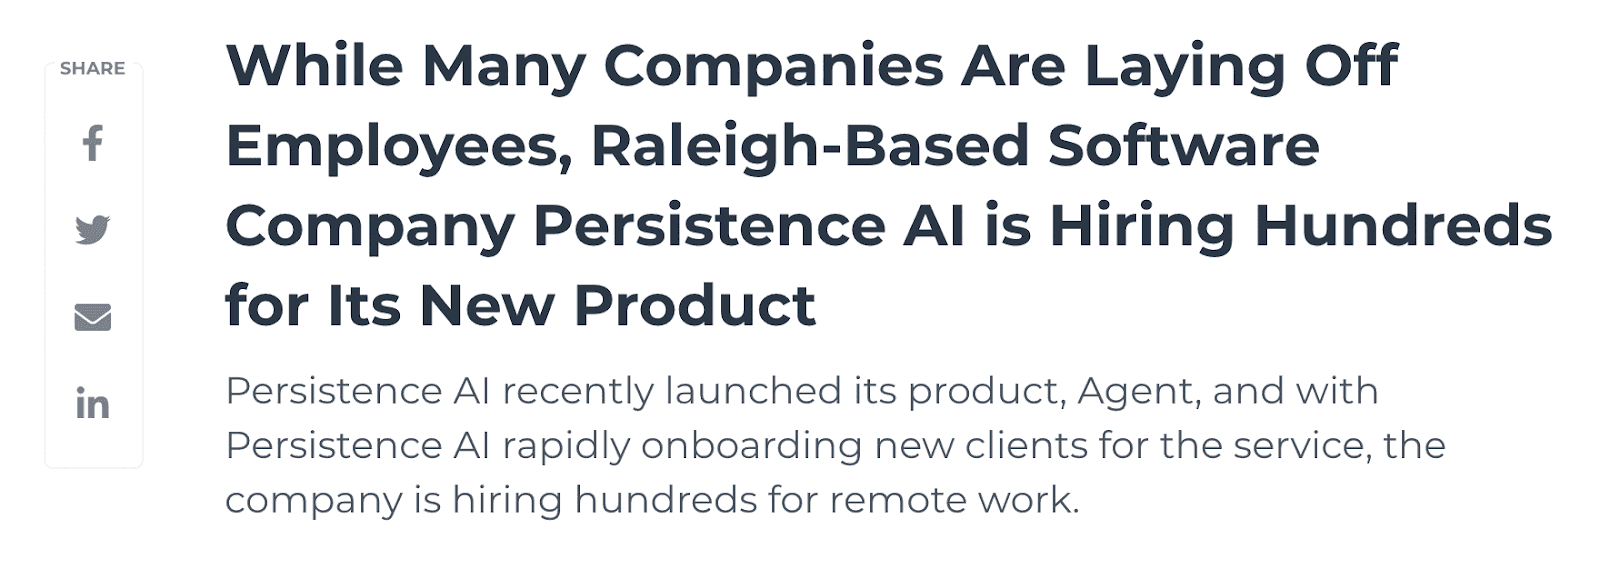 While many companies are laying off employees, Raleigh-based software company Persistence AI is hiring hundreds for its new product 